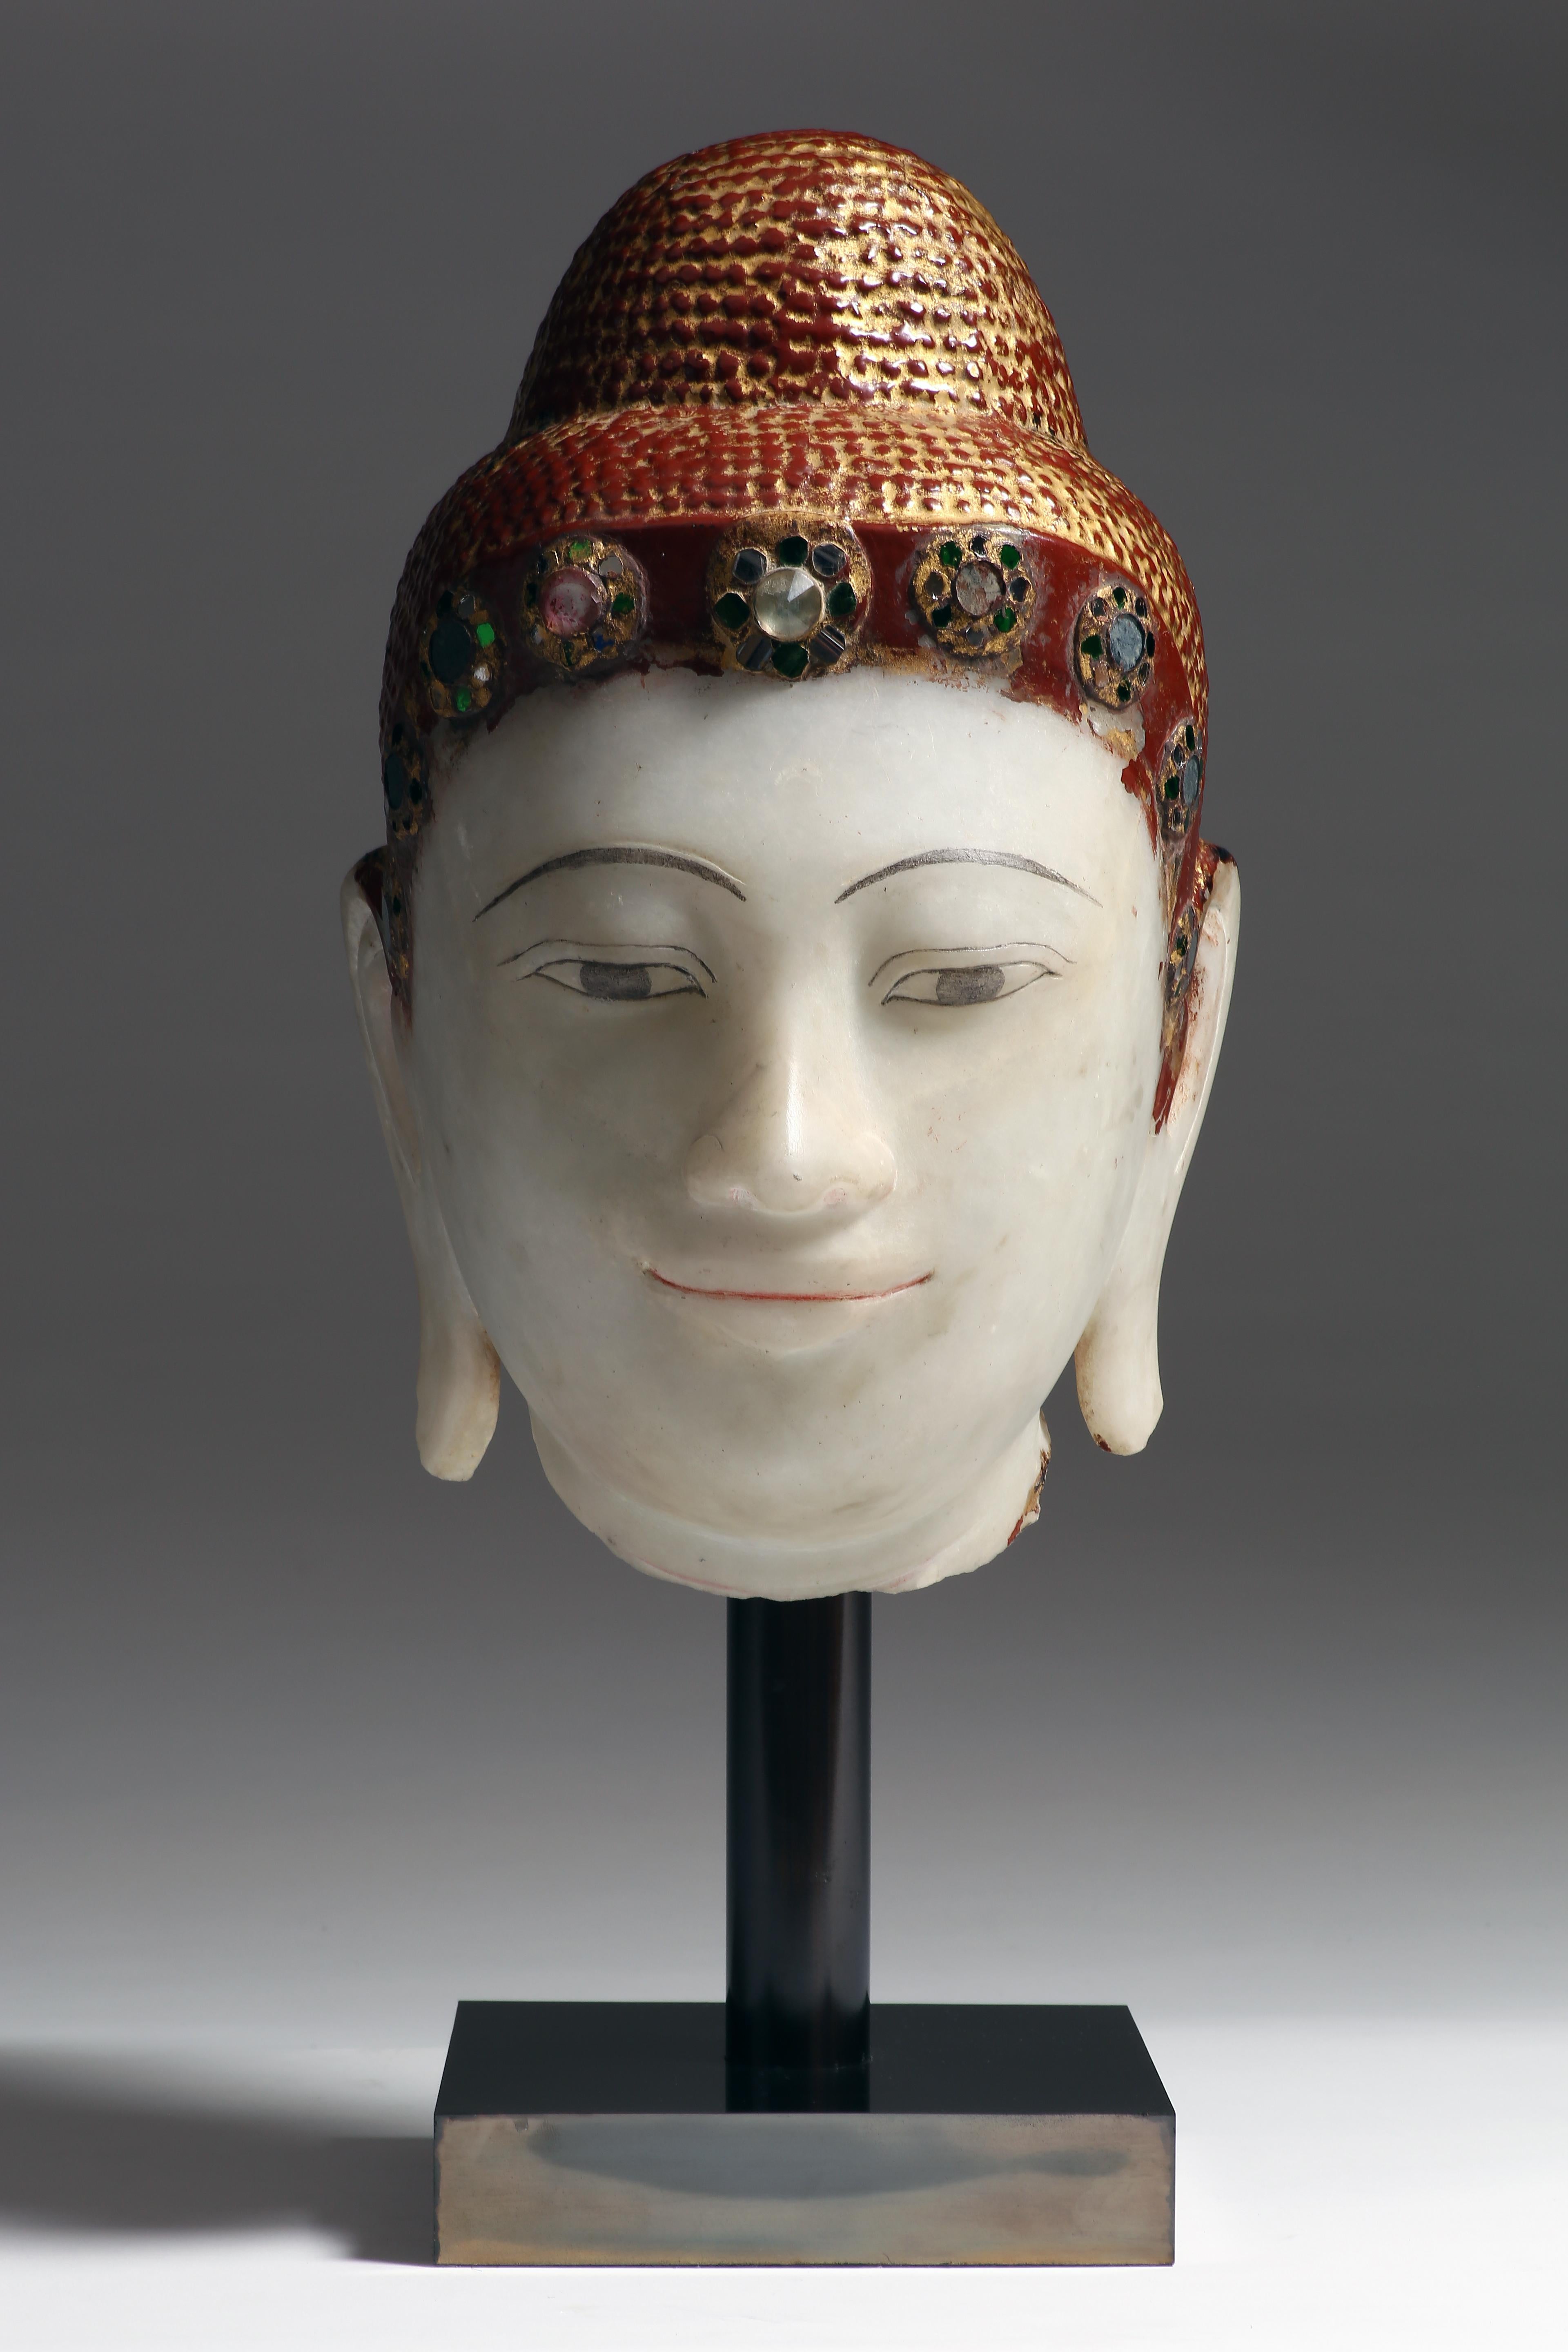 The face is carved with a meditative expression, slit eyes set under arched eyebrows, aquiline nose and smiling lips, elongated earlobes, curled hairdress and usnisha. Glass (hman-zi shwei-cha) decoration is inlaid on the hairdress band. Gilt and